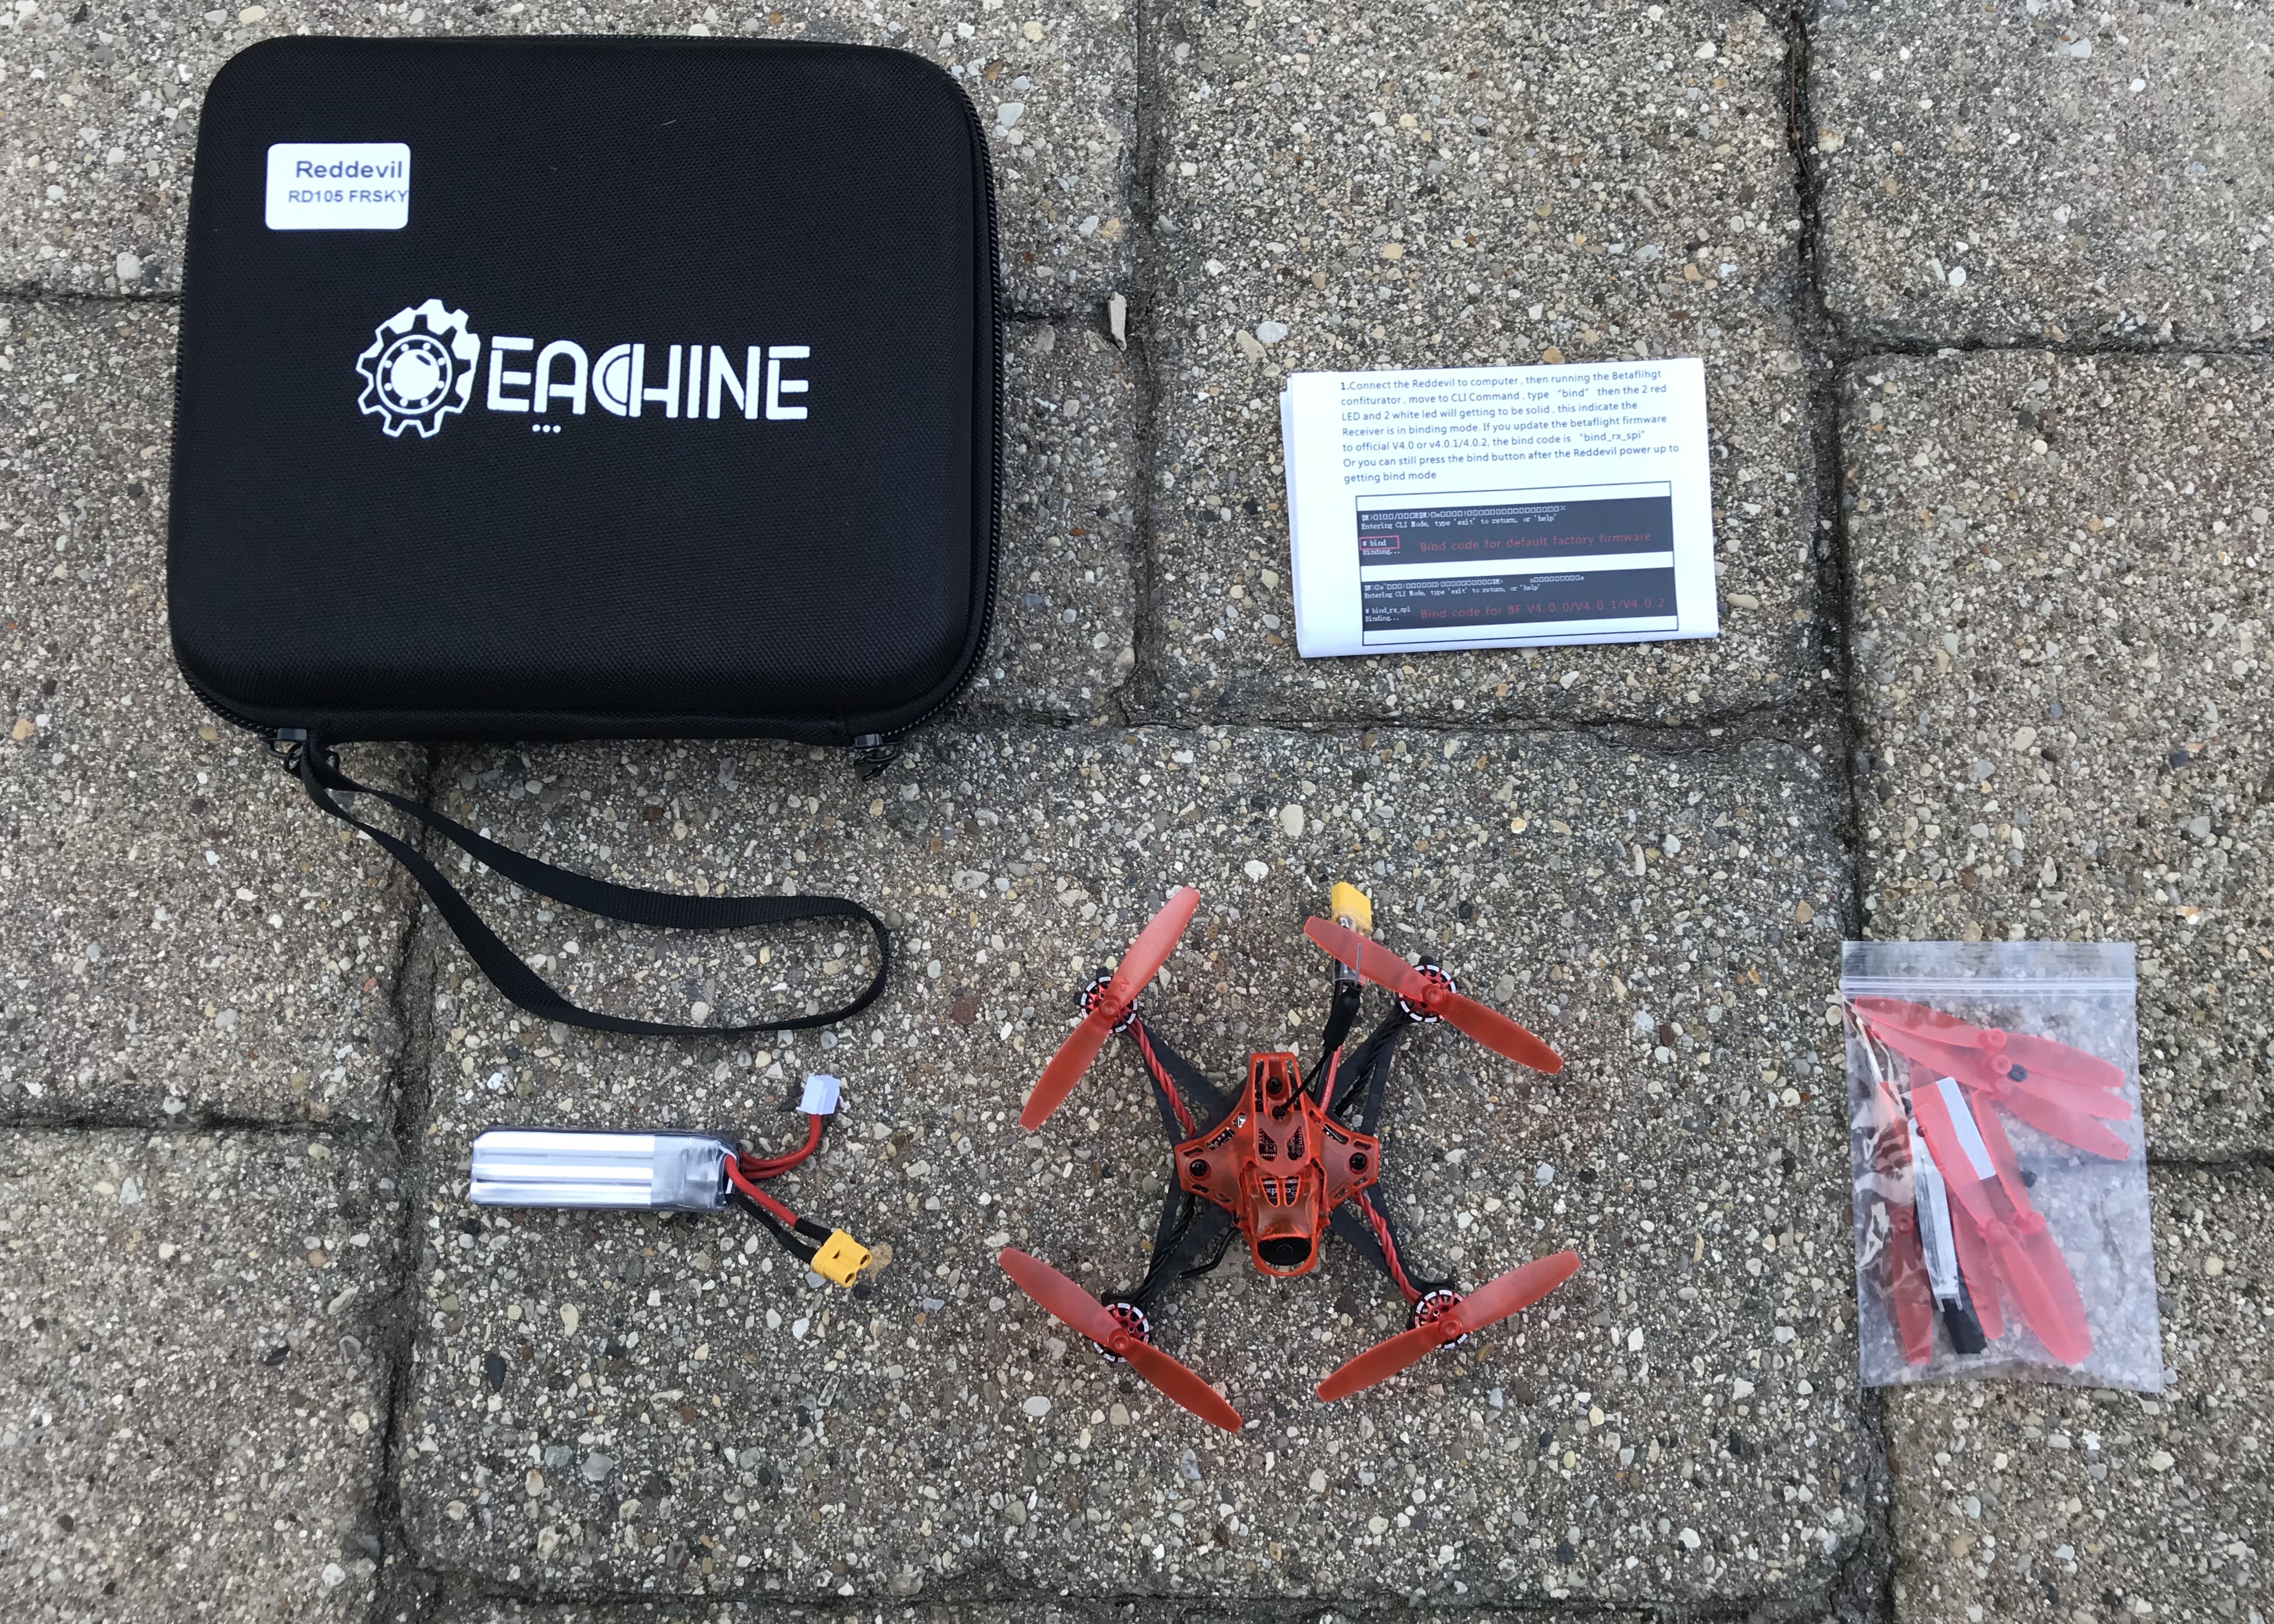 eachine toothpick red devil